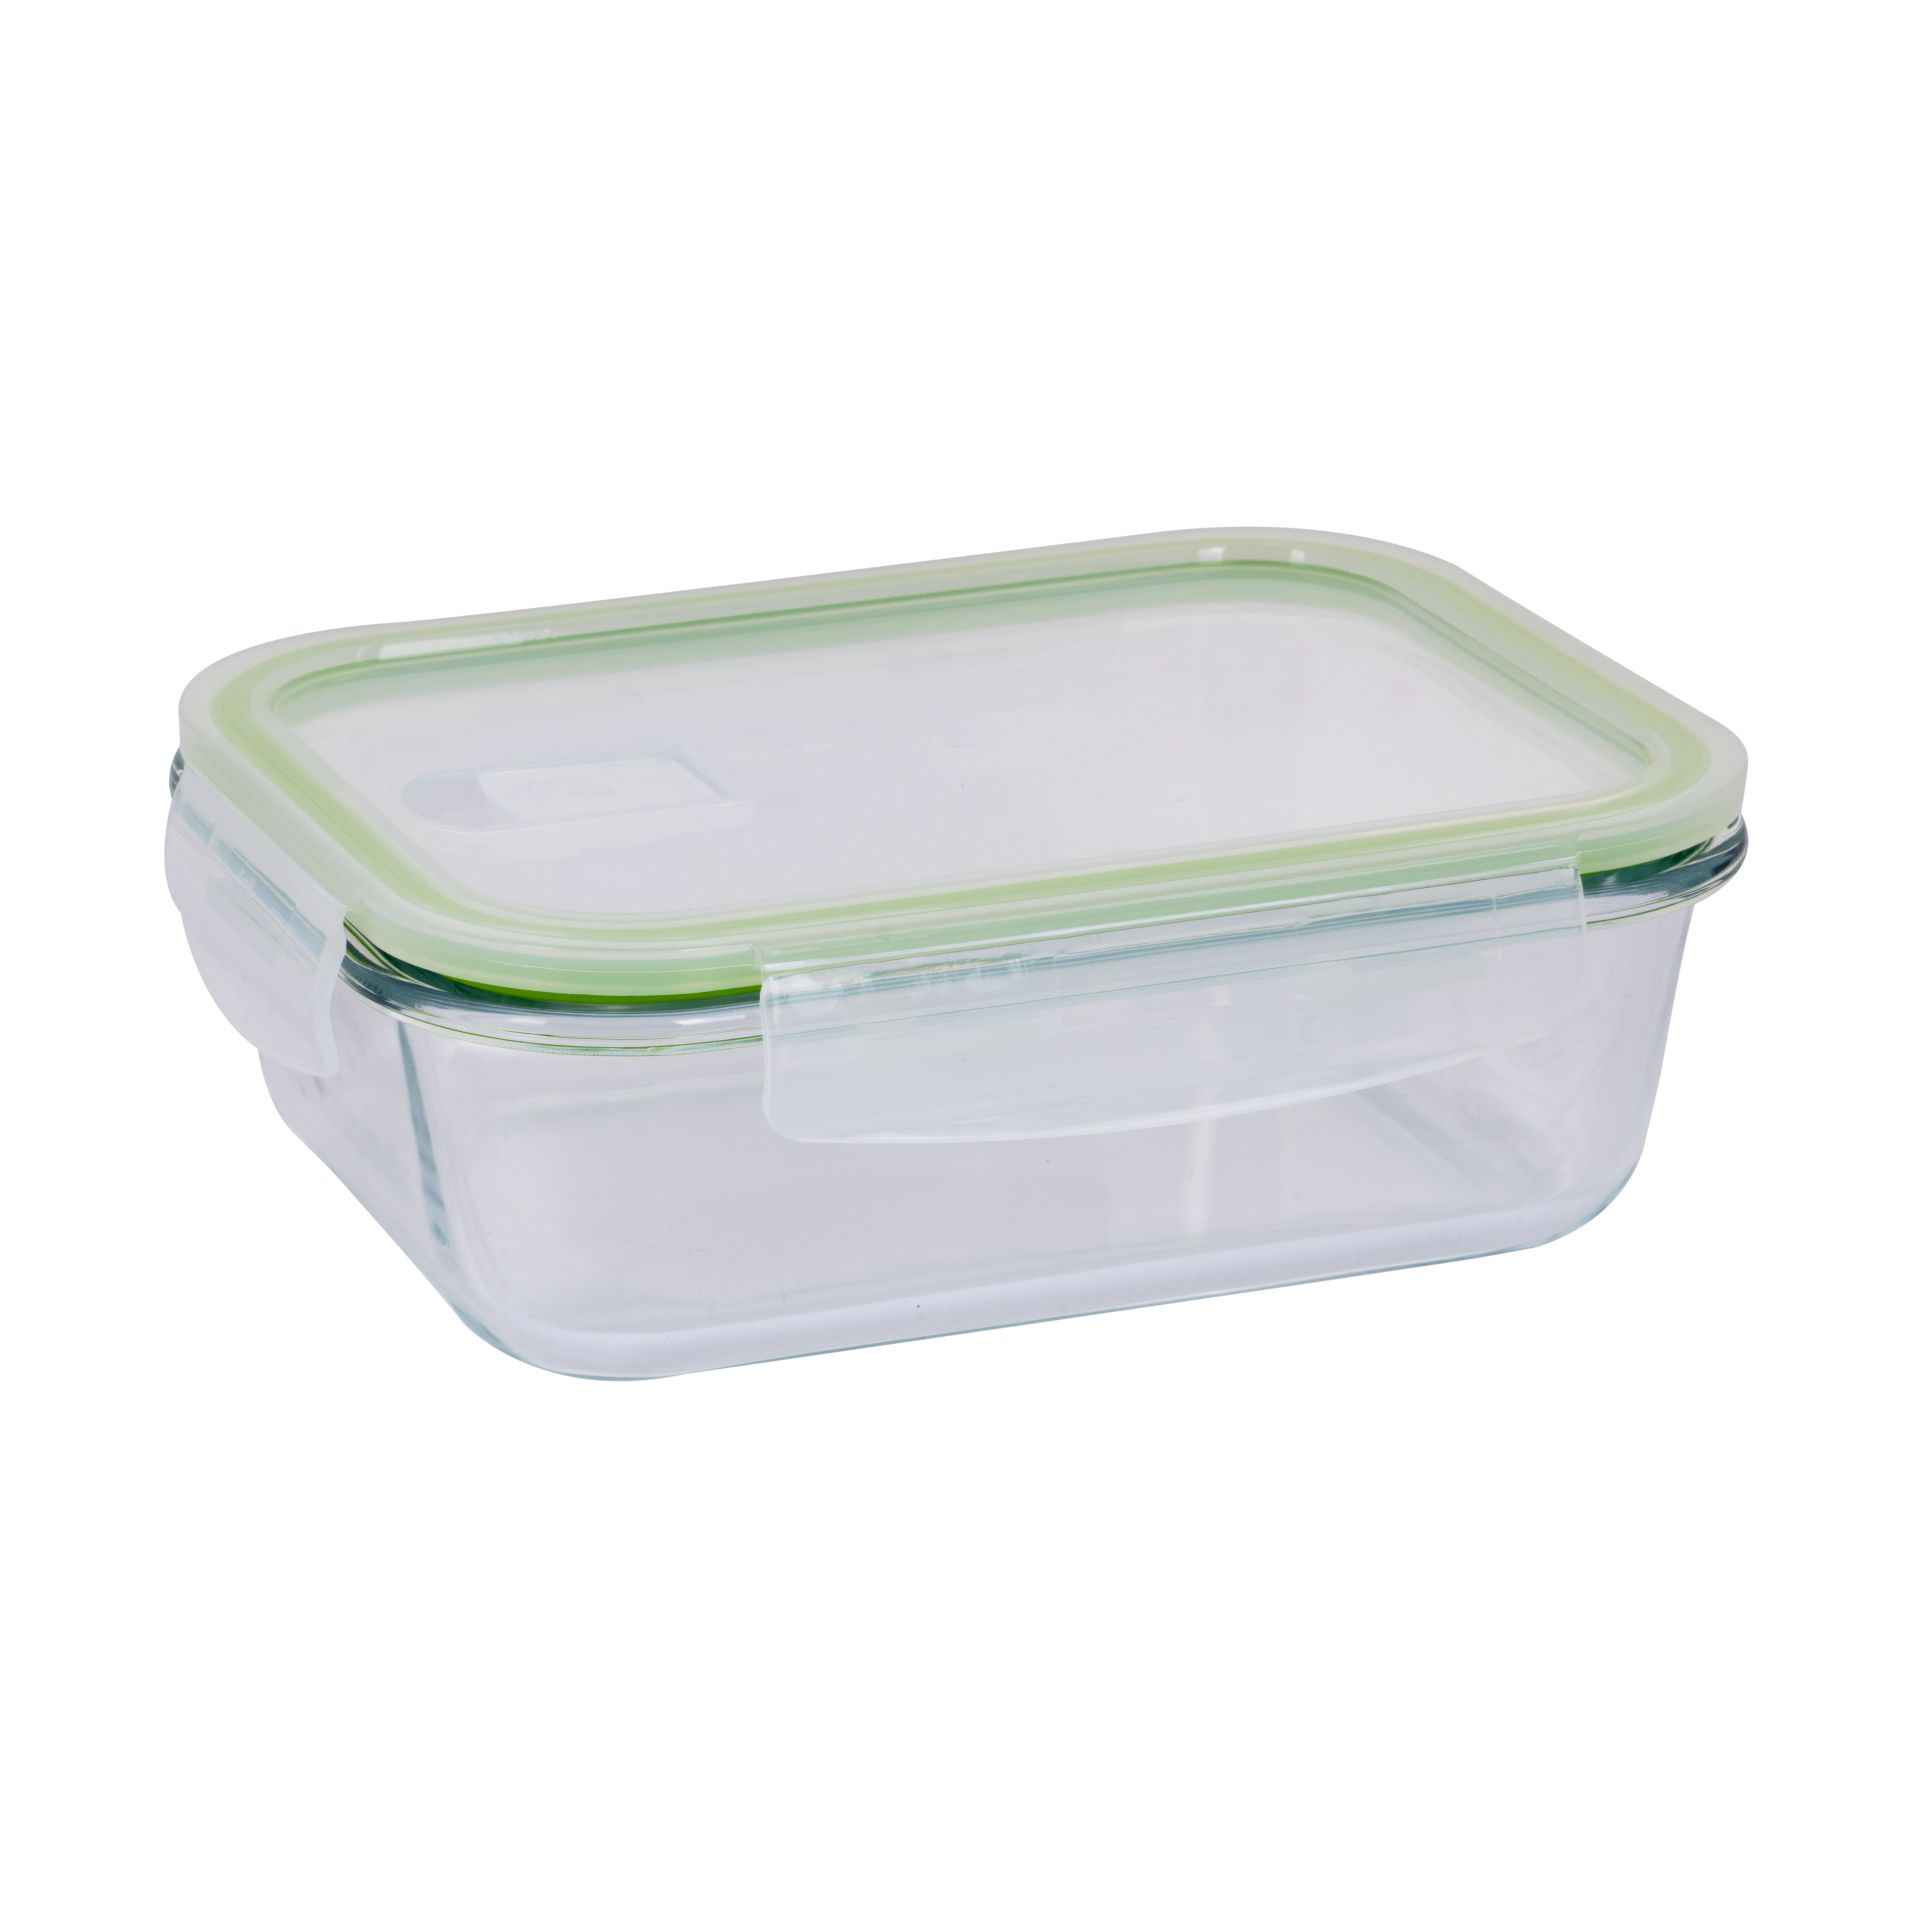 Royalford Rf9984 2Pcs Glass Airtight Container With Lids 1000Ml & 400Ml - Durable Heat Resistant Borosilicate Glass Dishwasher/Oven/Freezer Safe | Leak Proof Glass Meal Prep Containers